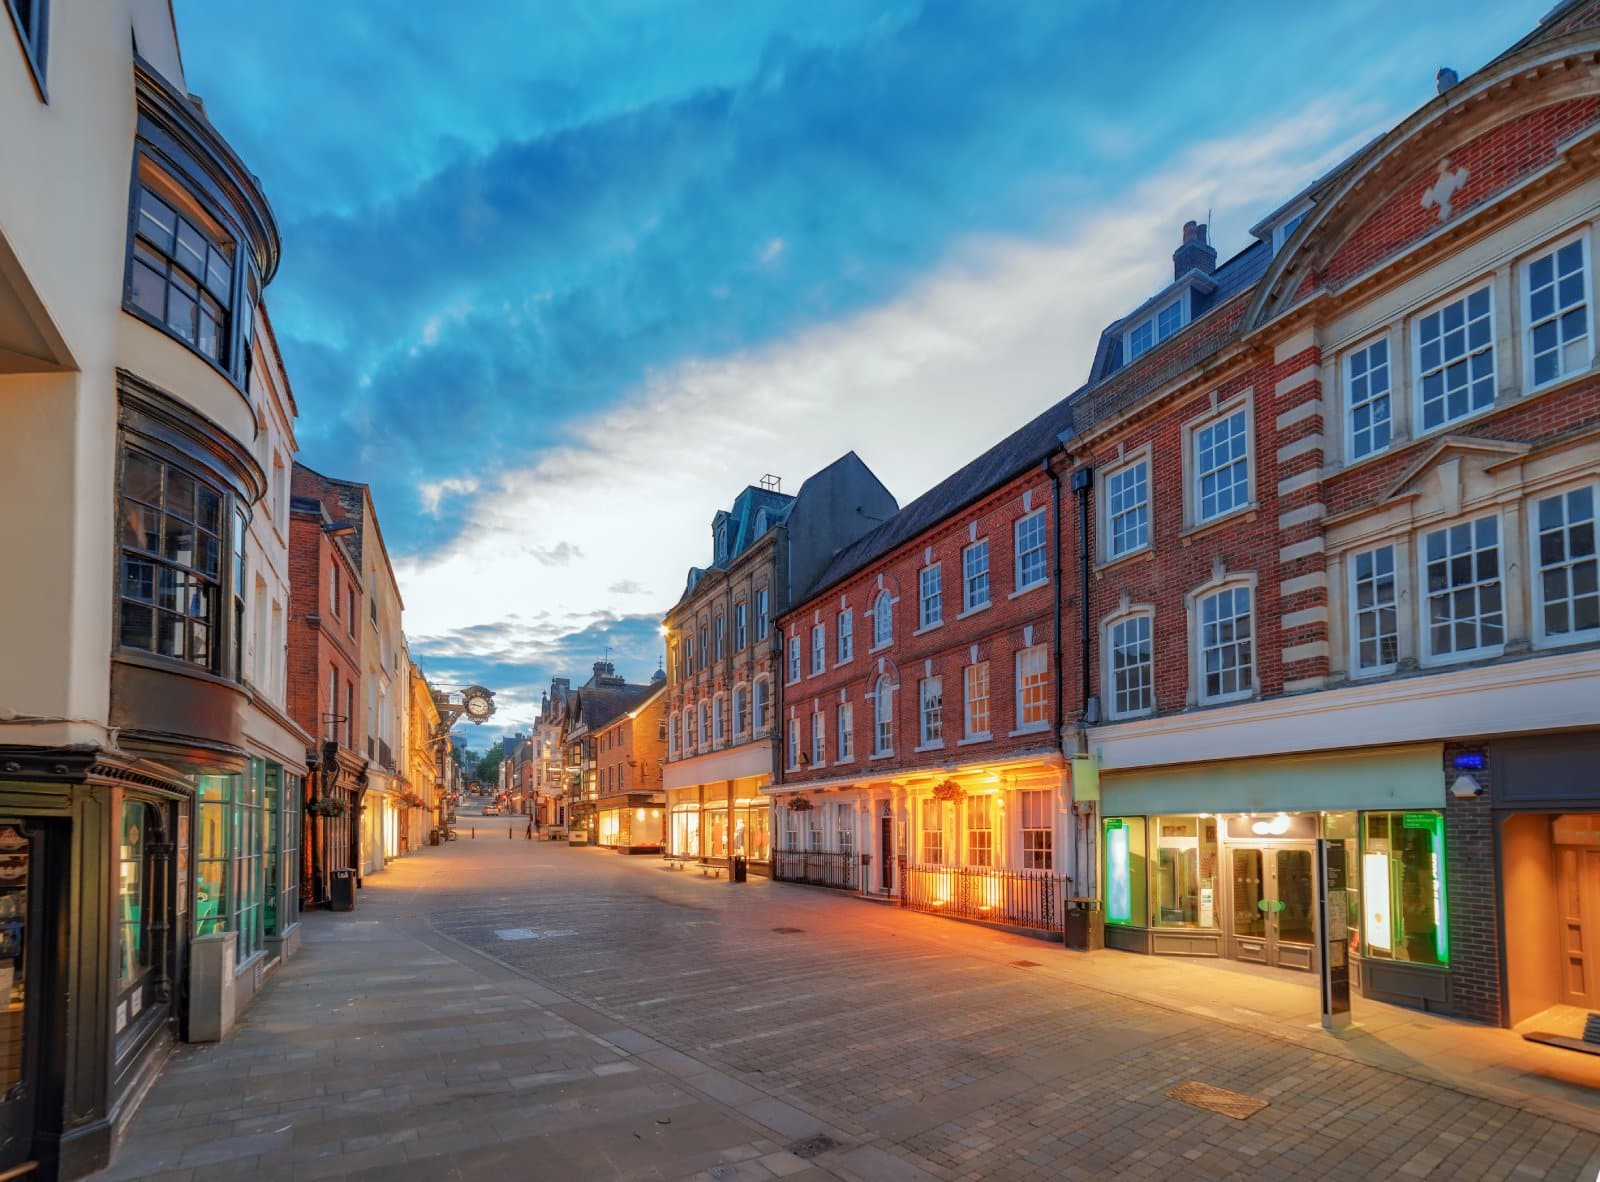 Image Credit: Shutterstock / Sterling Images <p>Hampshire shines next on our list, mixing sun-soaked days with a dose of cultural heritage. Whether it’s basking in the historic streets of Winchester or enjoying the natural reserves, the sun seems to have a soft spot for Hampshire.</p>